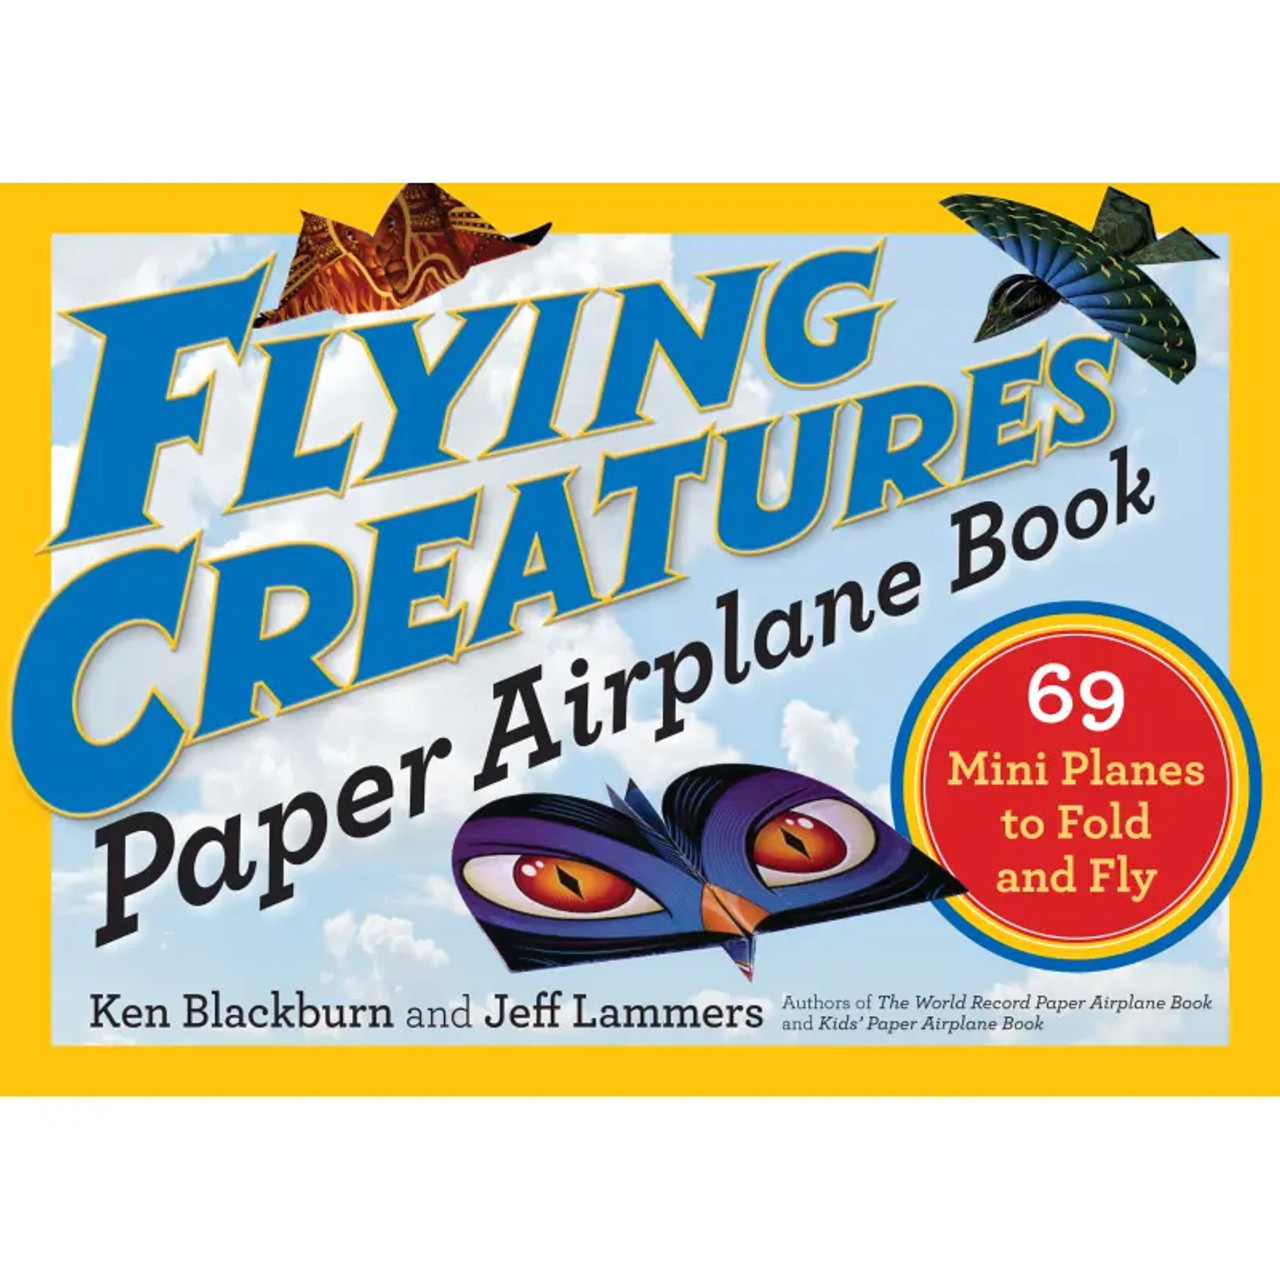 Creativity for Kids Paper Airplane Squadron - Create  